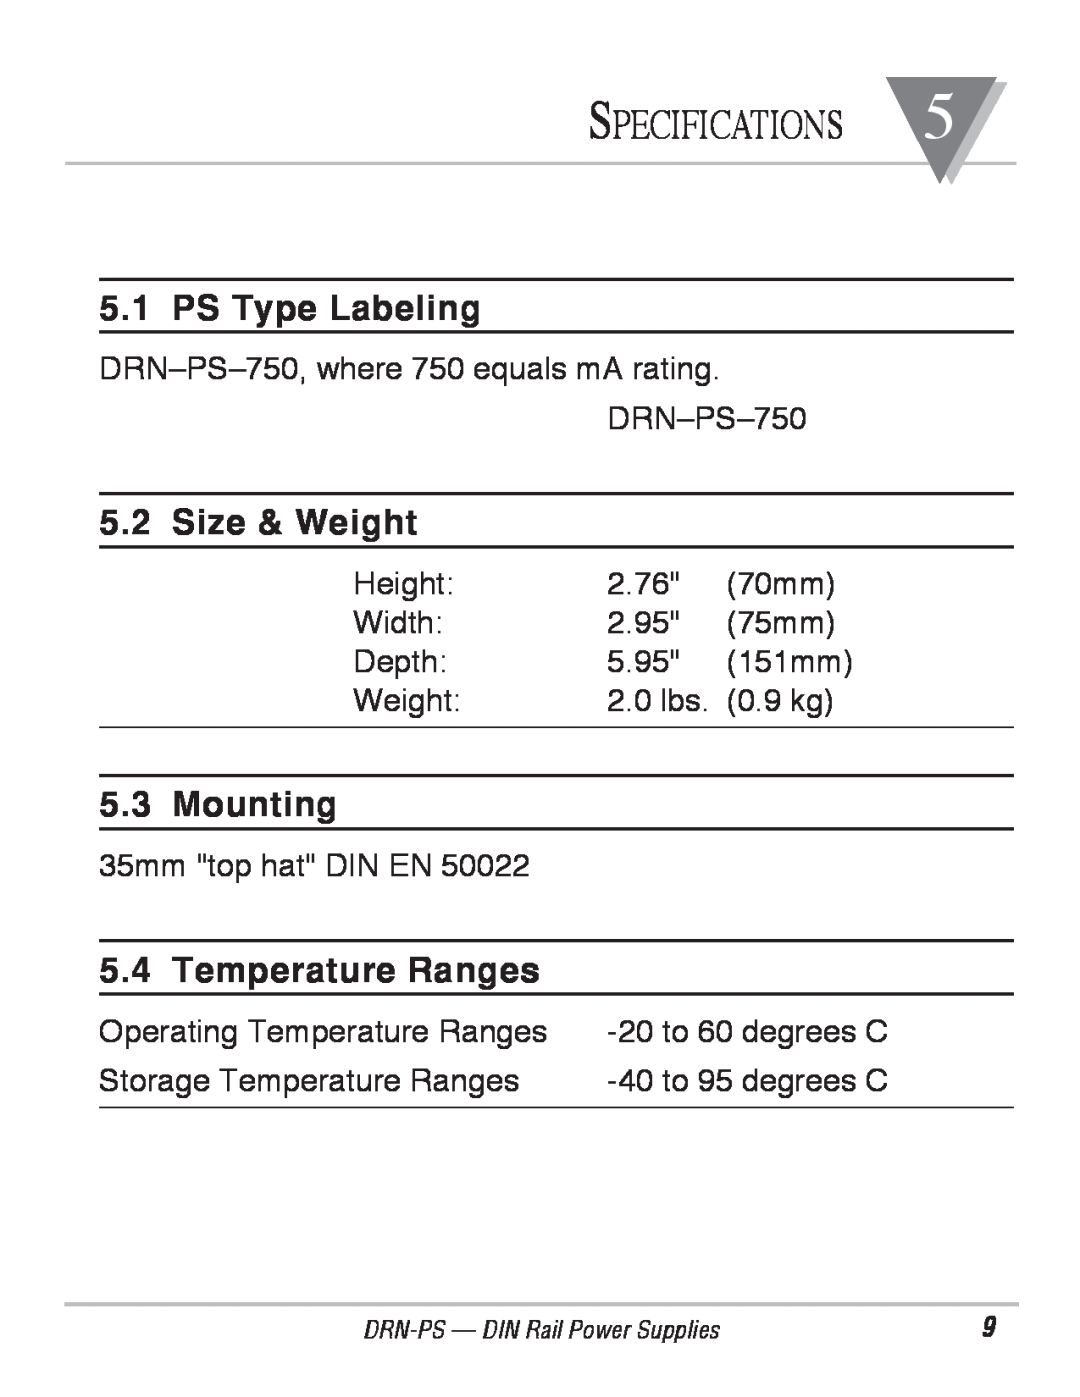 Omega Engineering DRN-PS-750 manual Specifications, PS Type Labeling, Size & Weight, Mounting, Temperature Ranges 